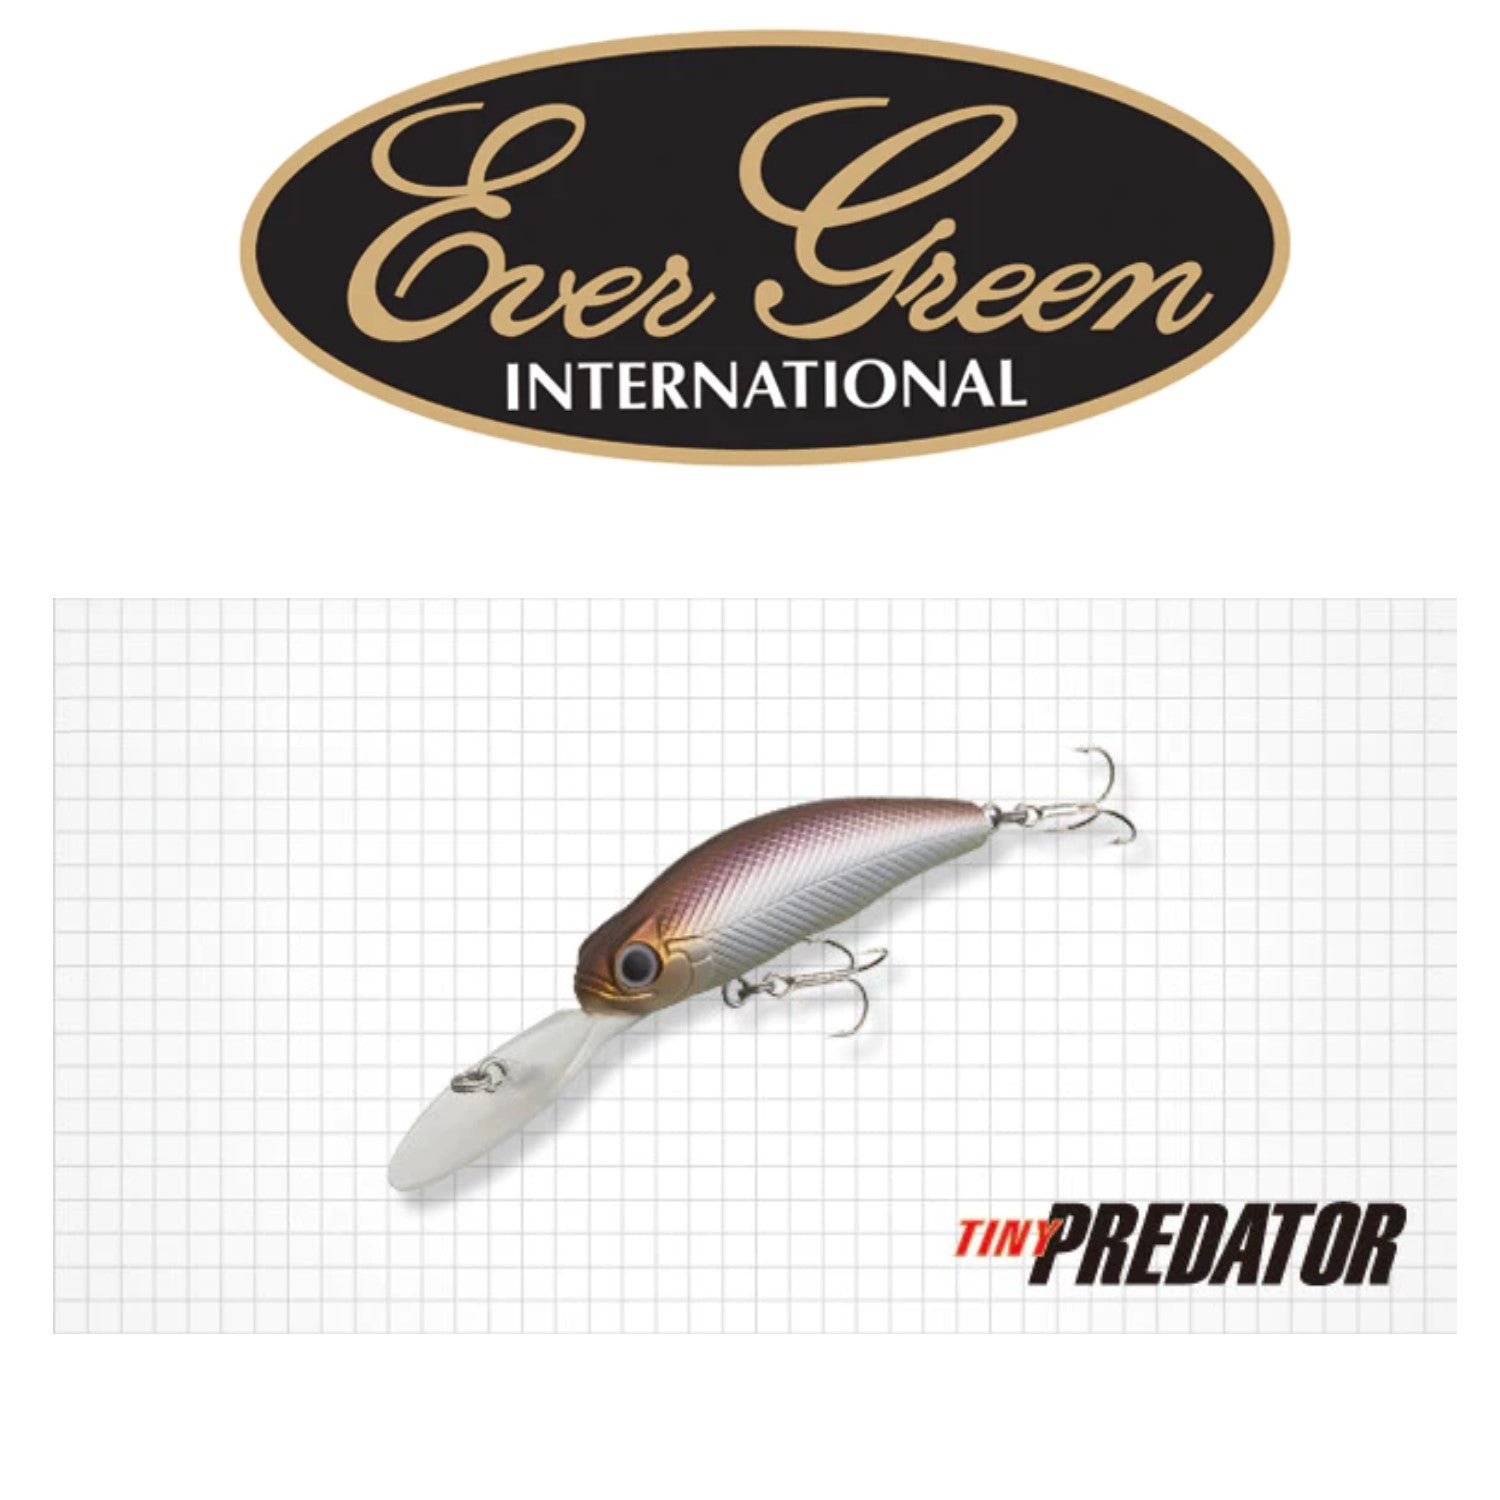 Ever Green Tiny Predator 55mm - Compleat Angler Nedlands Pro Tackle